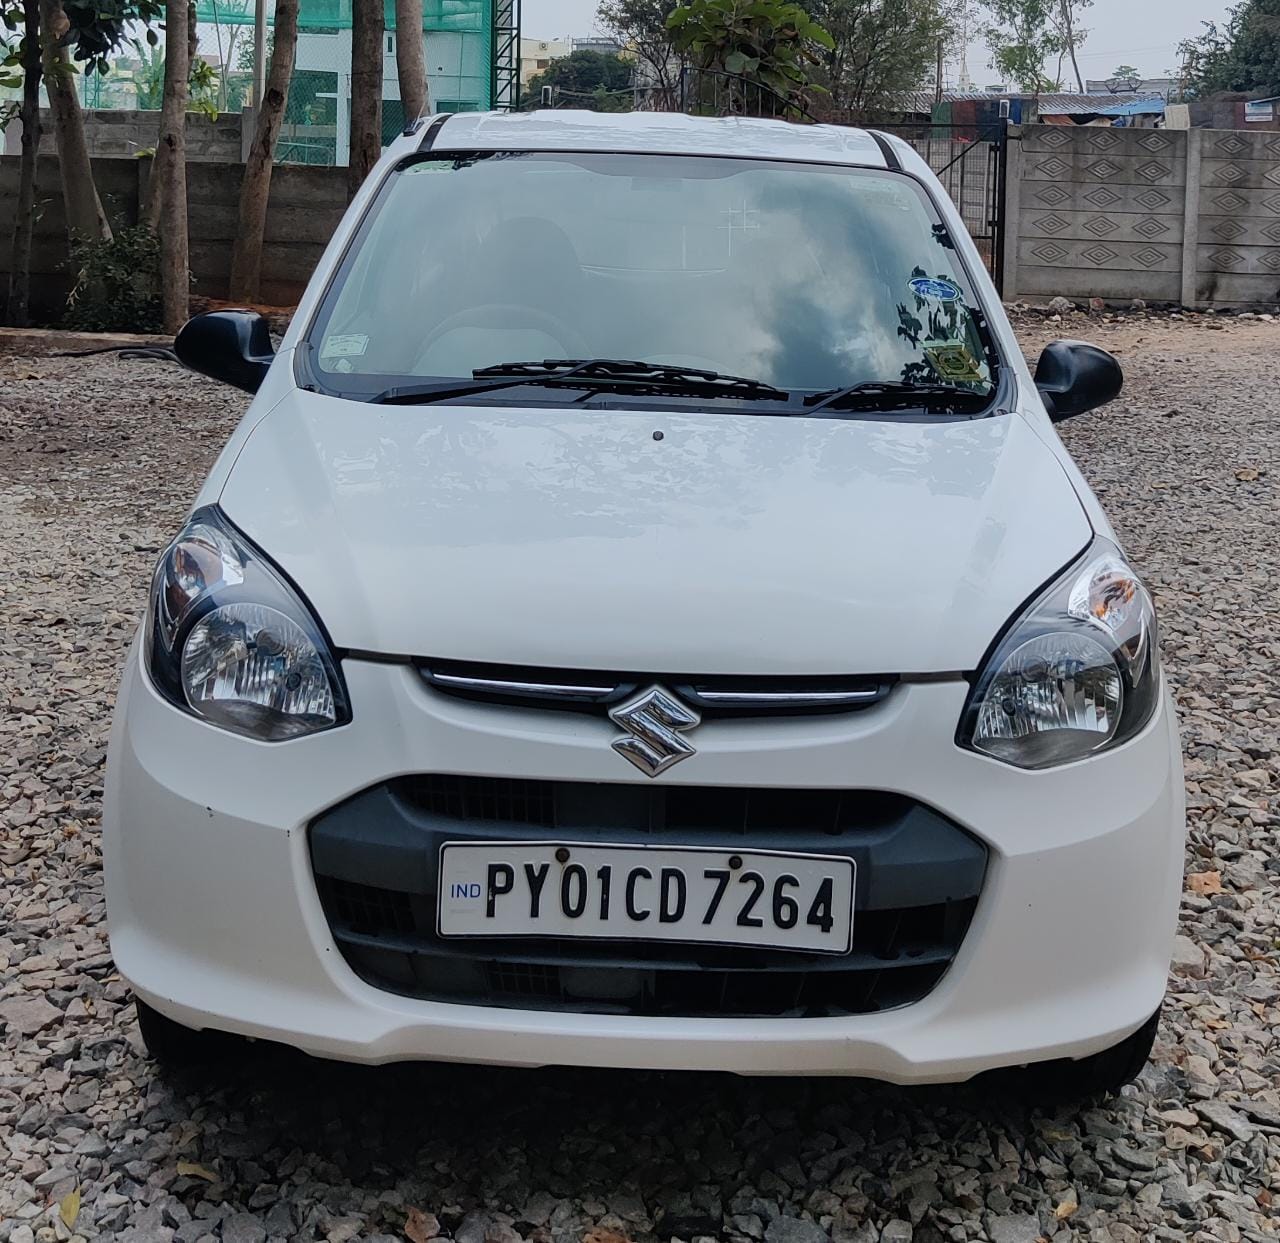 6513-for-sale-Maruthi-Suzuki-Alto-800-Petrol-First-Owner-2014-PY-registered-rs-259999